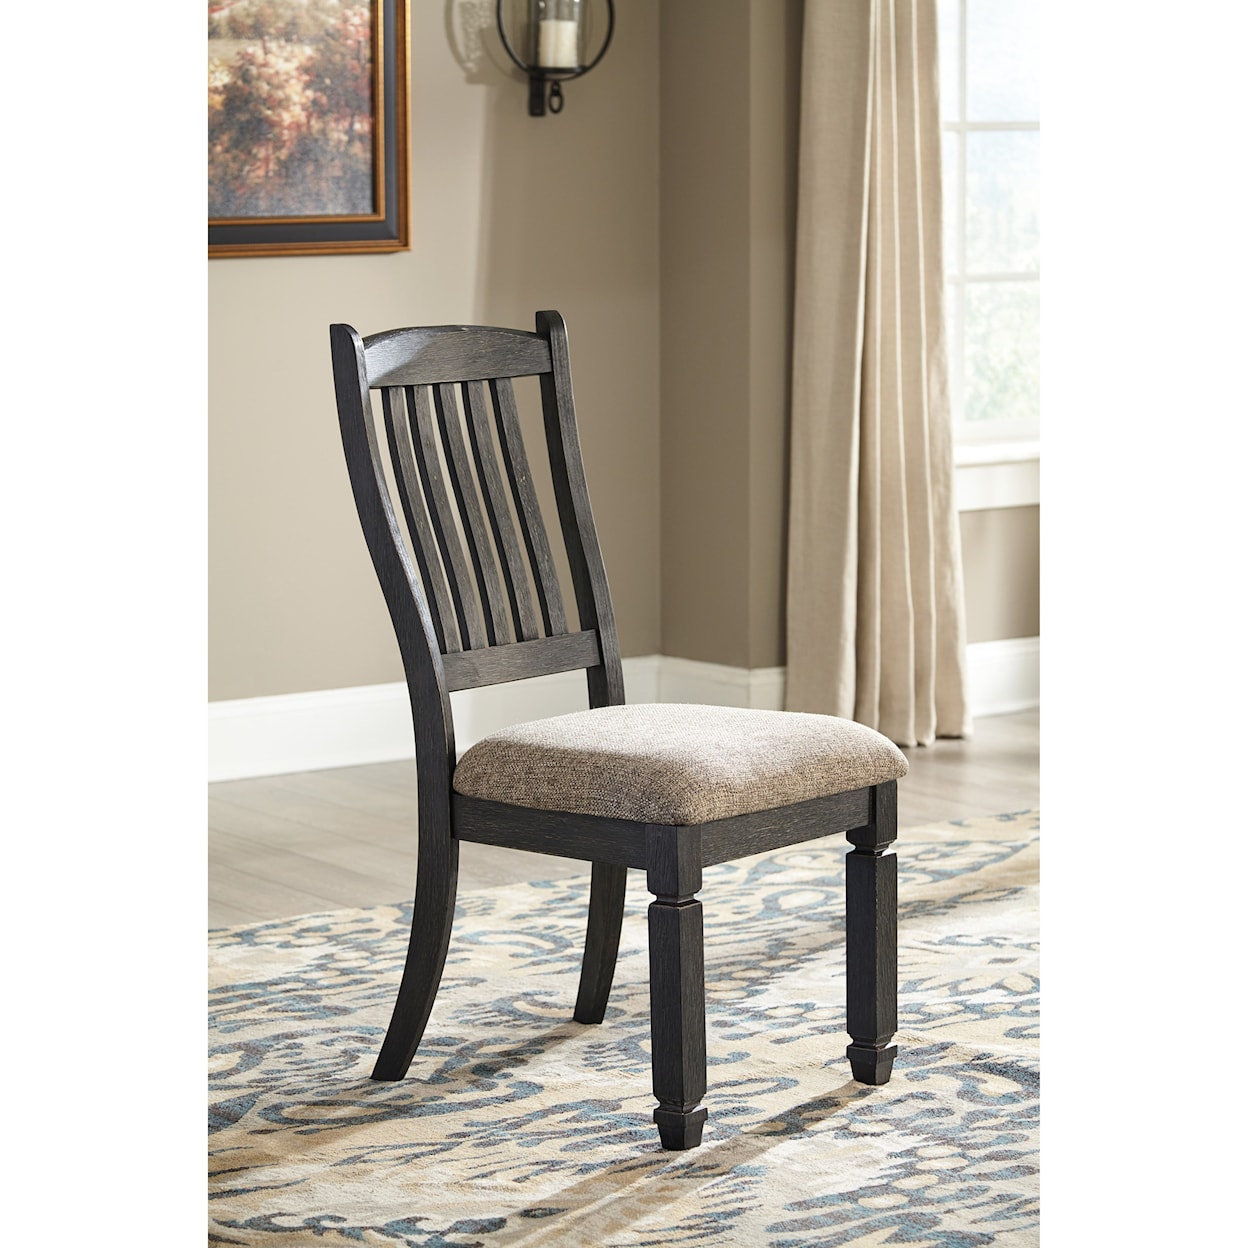 Signature Design by Ashley Furniture Tyler Creek 6-Piece Table and Chair Set